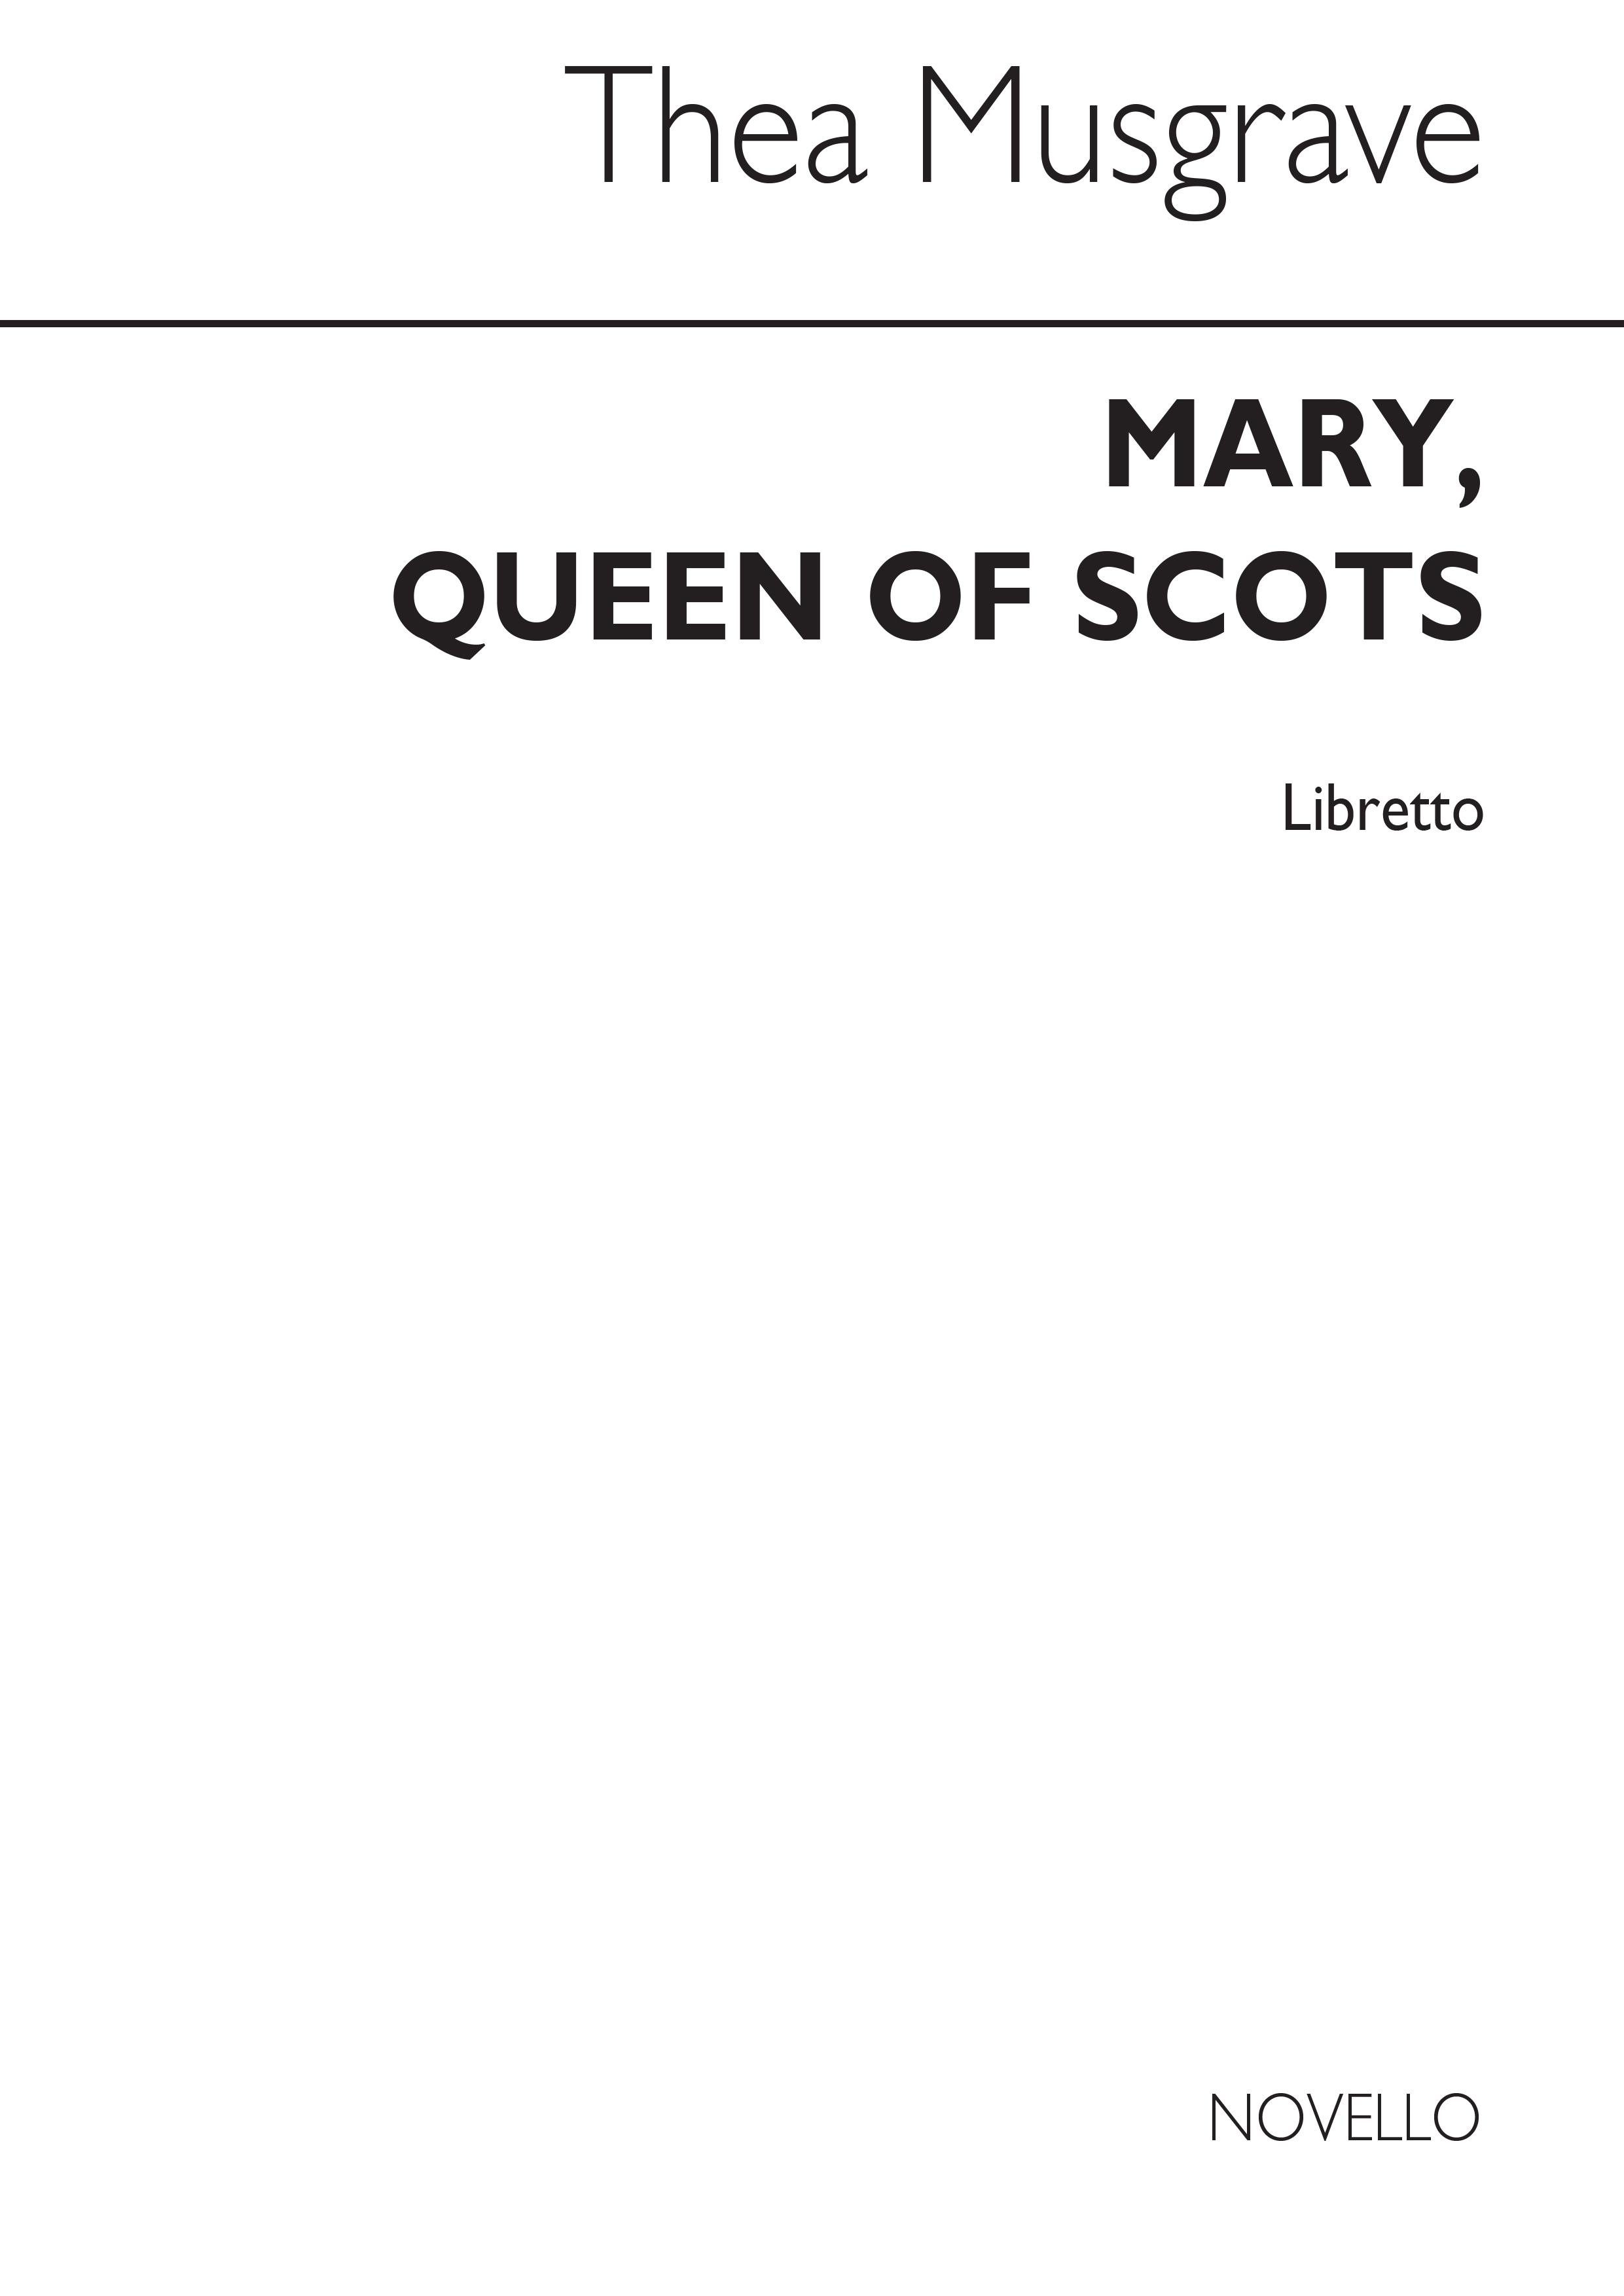 Musgrave: Mary Queen Of Scots (Libretto)